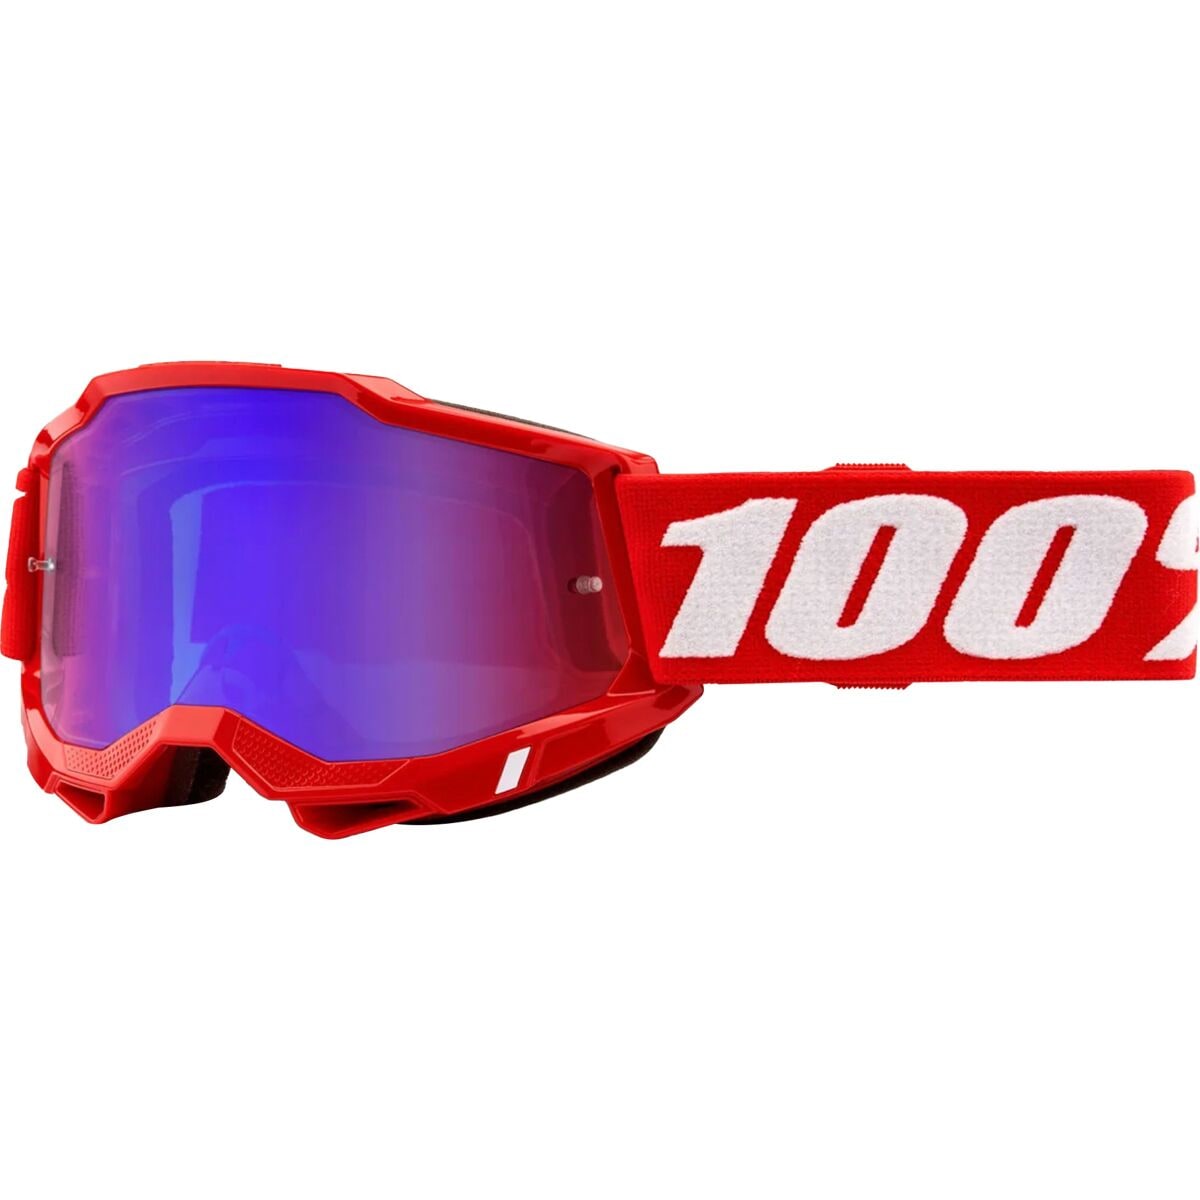 100% Accuri 2 Mirrored Lens Goggles Neon/Red/Mirror Red/Blue Lens, One Size